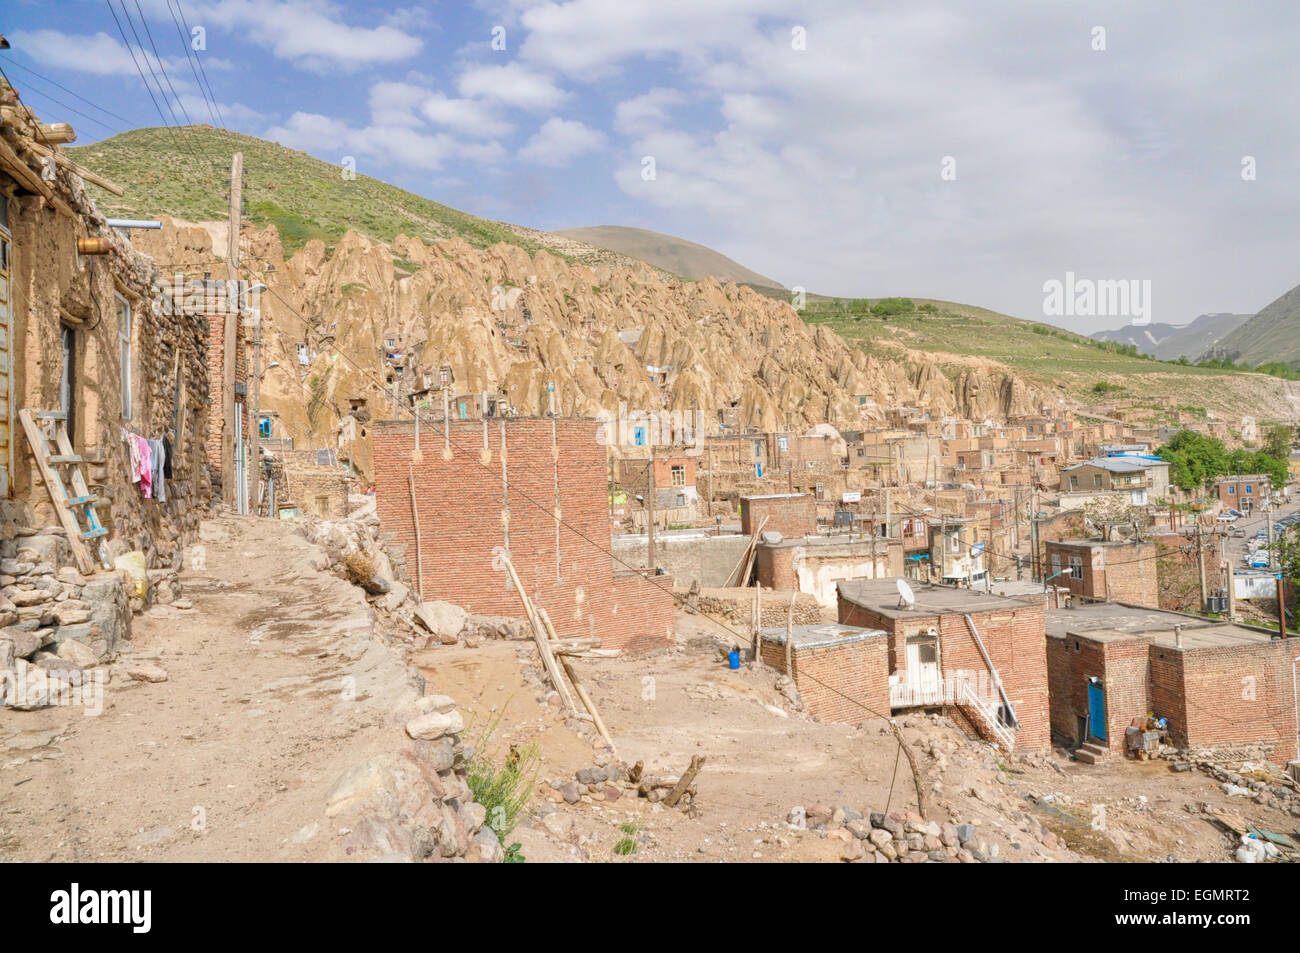 Scenic view of unusual cone shaped dwellings in Kandovan village in Iran Stock Photo